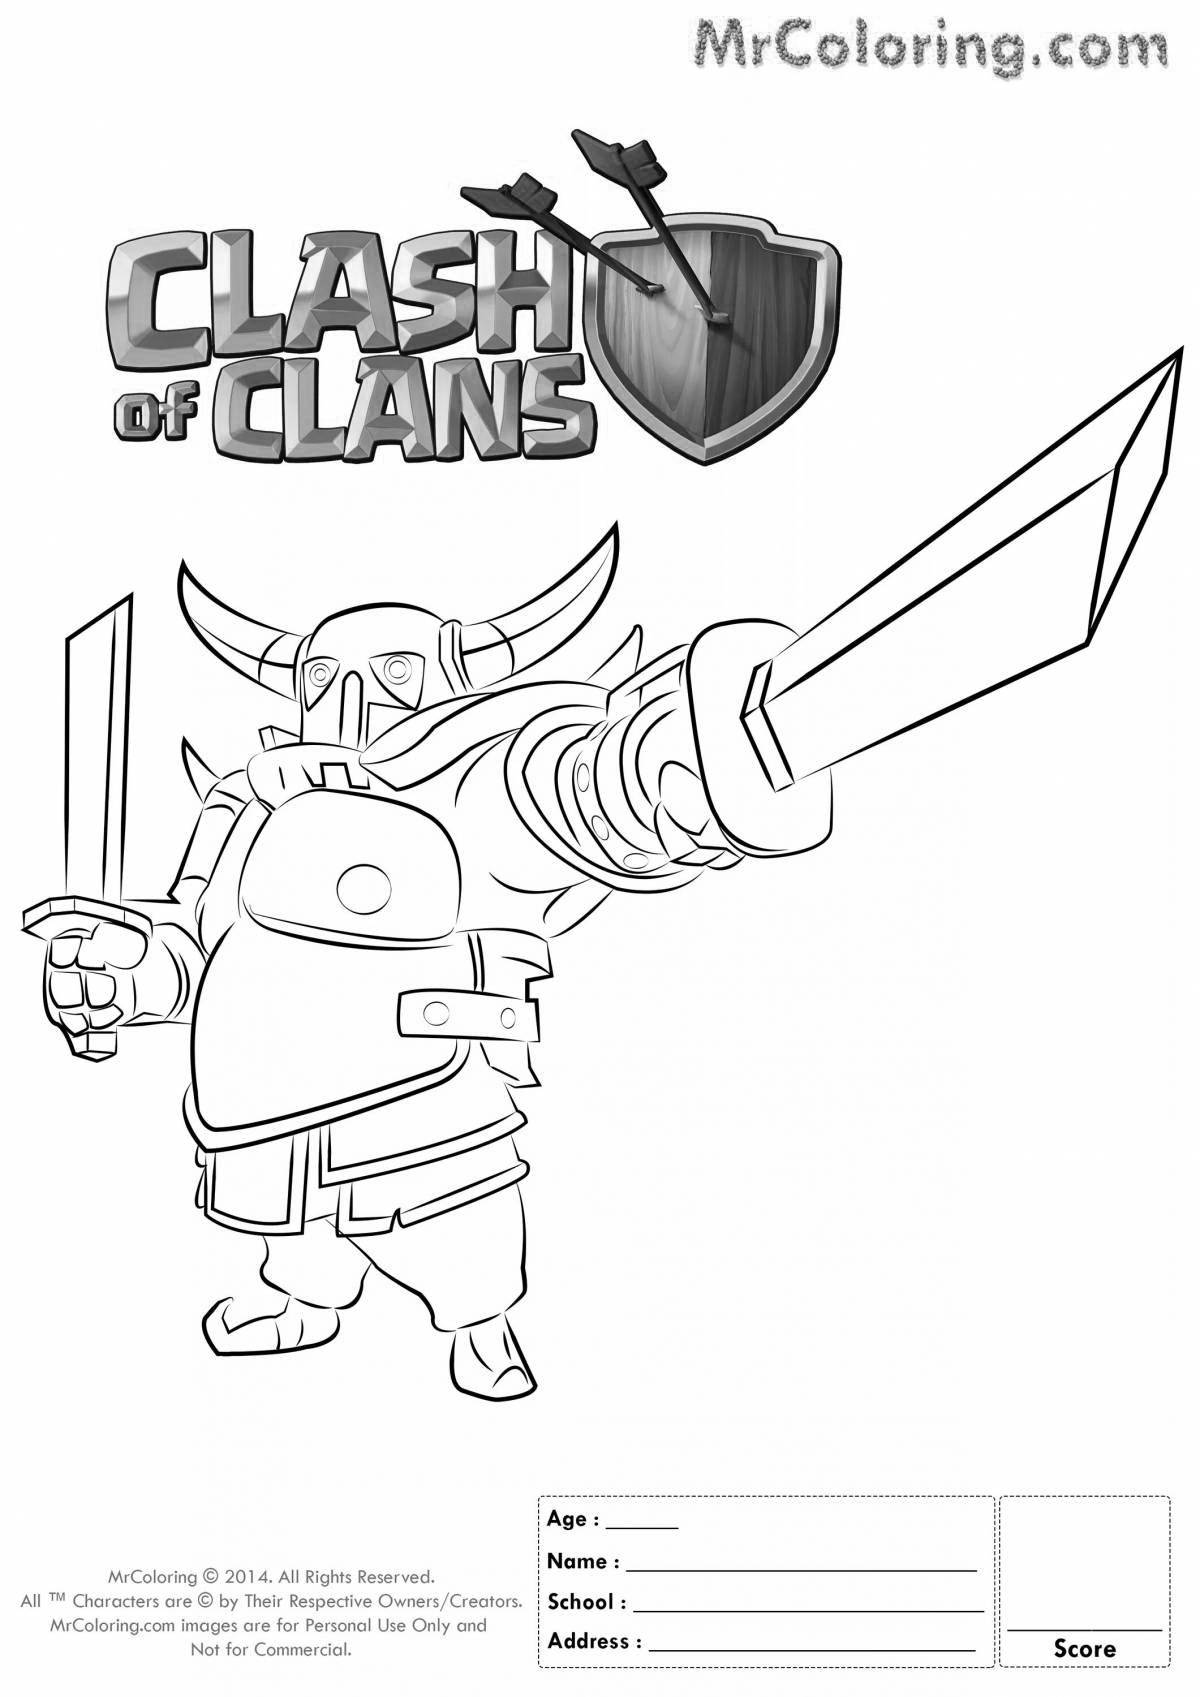 Intriguing clash of clans coloring book